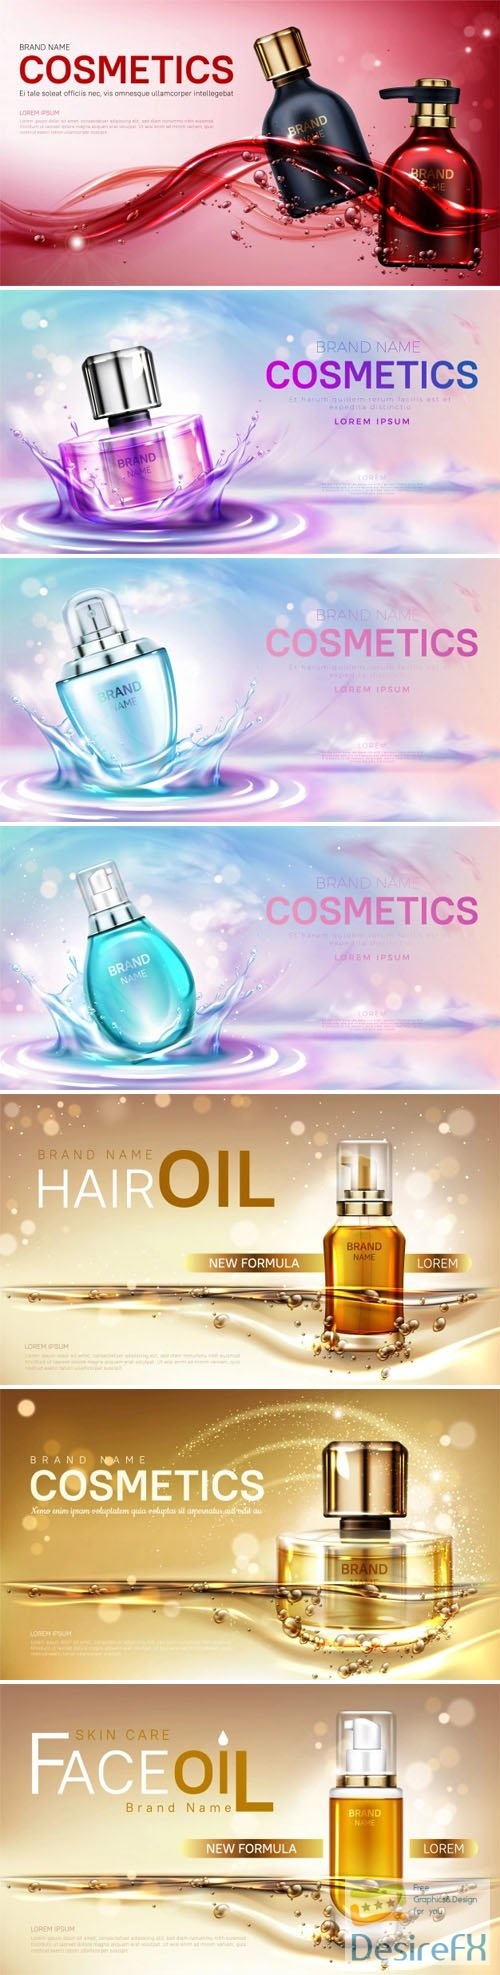 10+ Cosmetic Product Banners Vector Templates Collection